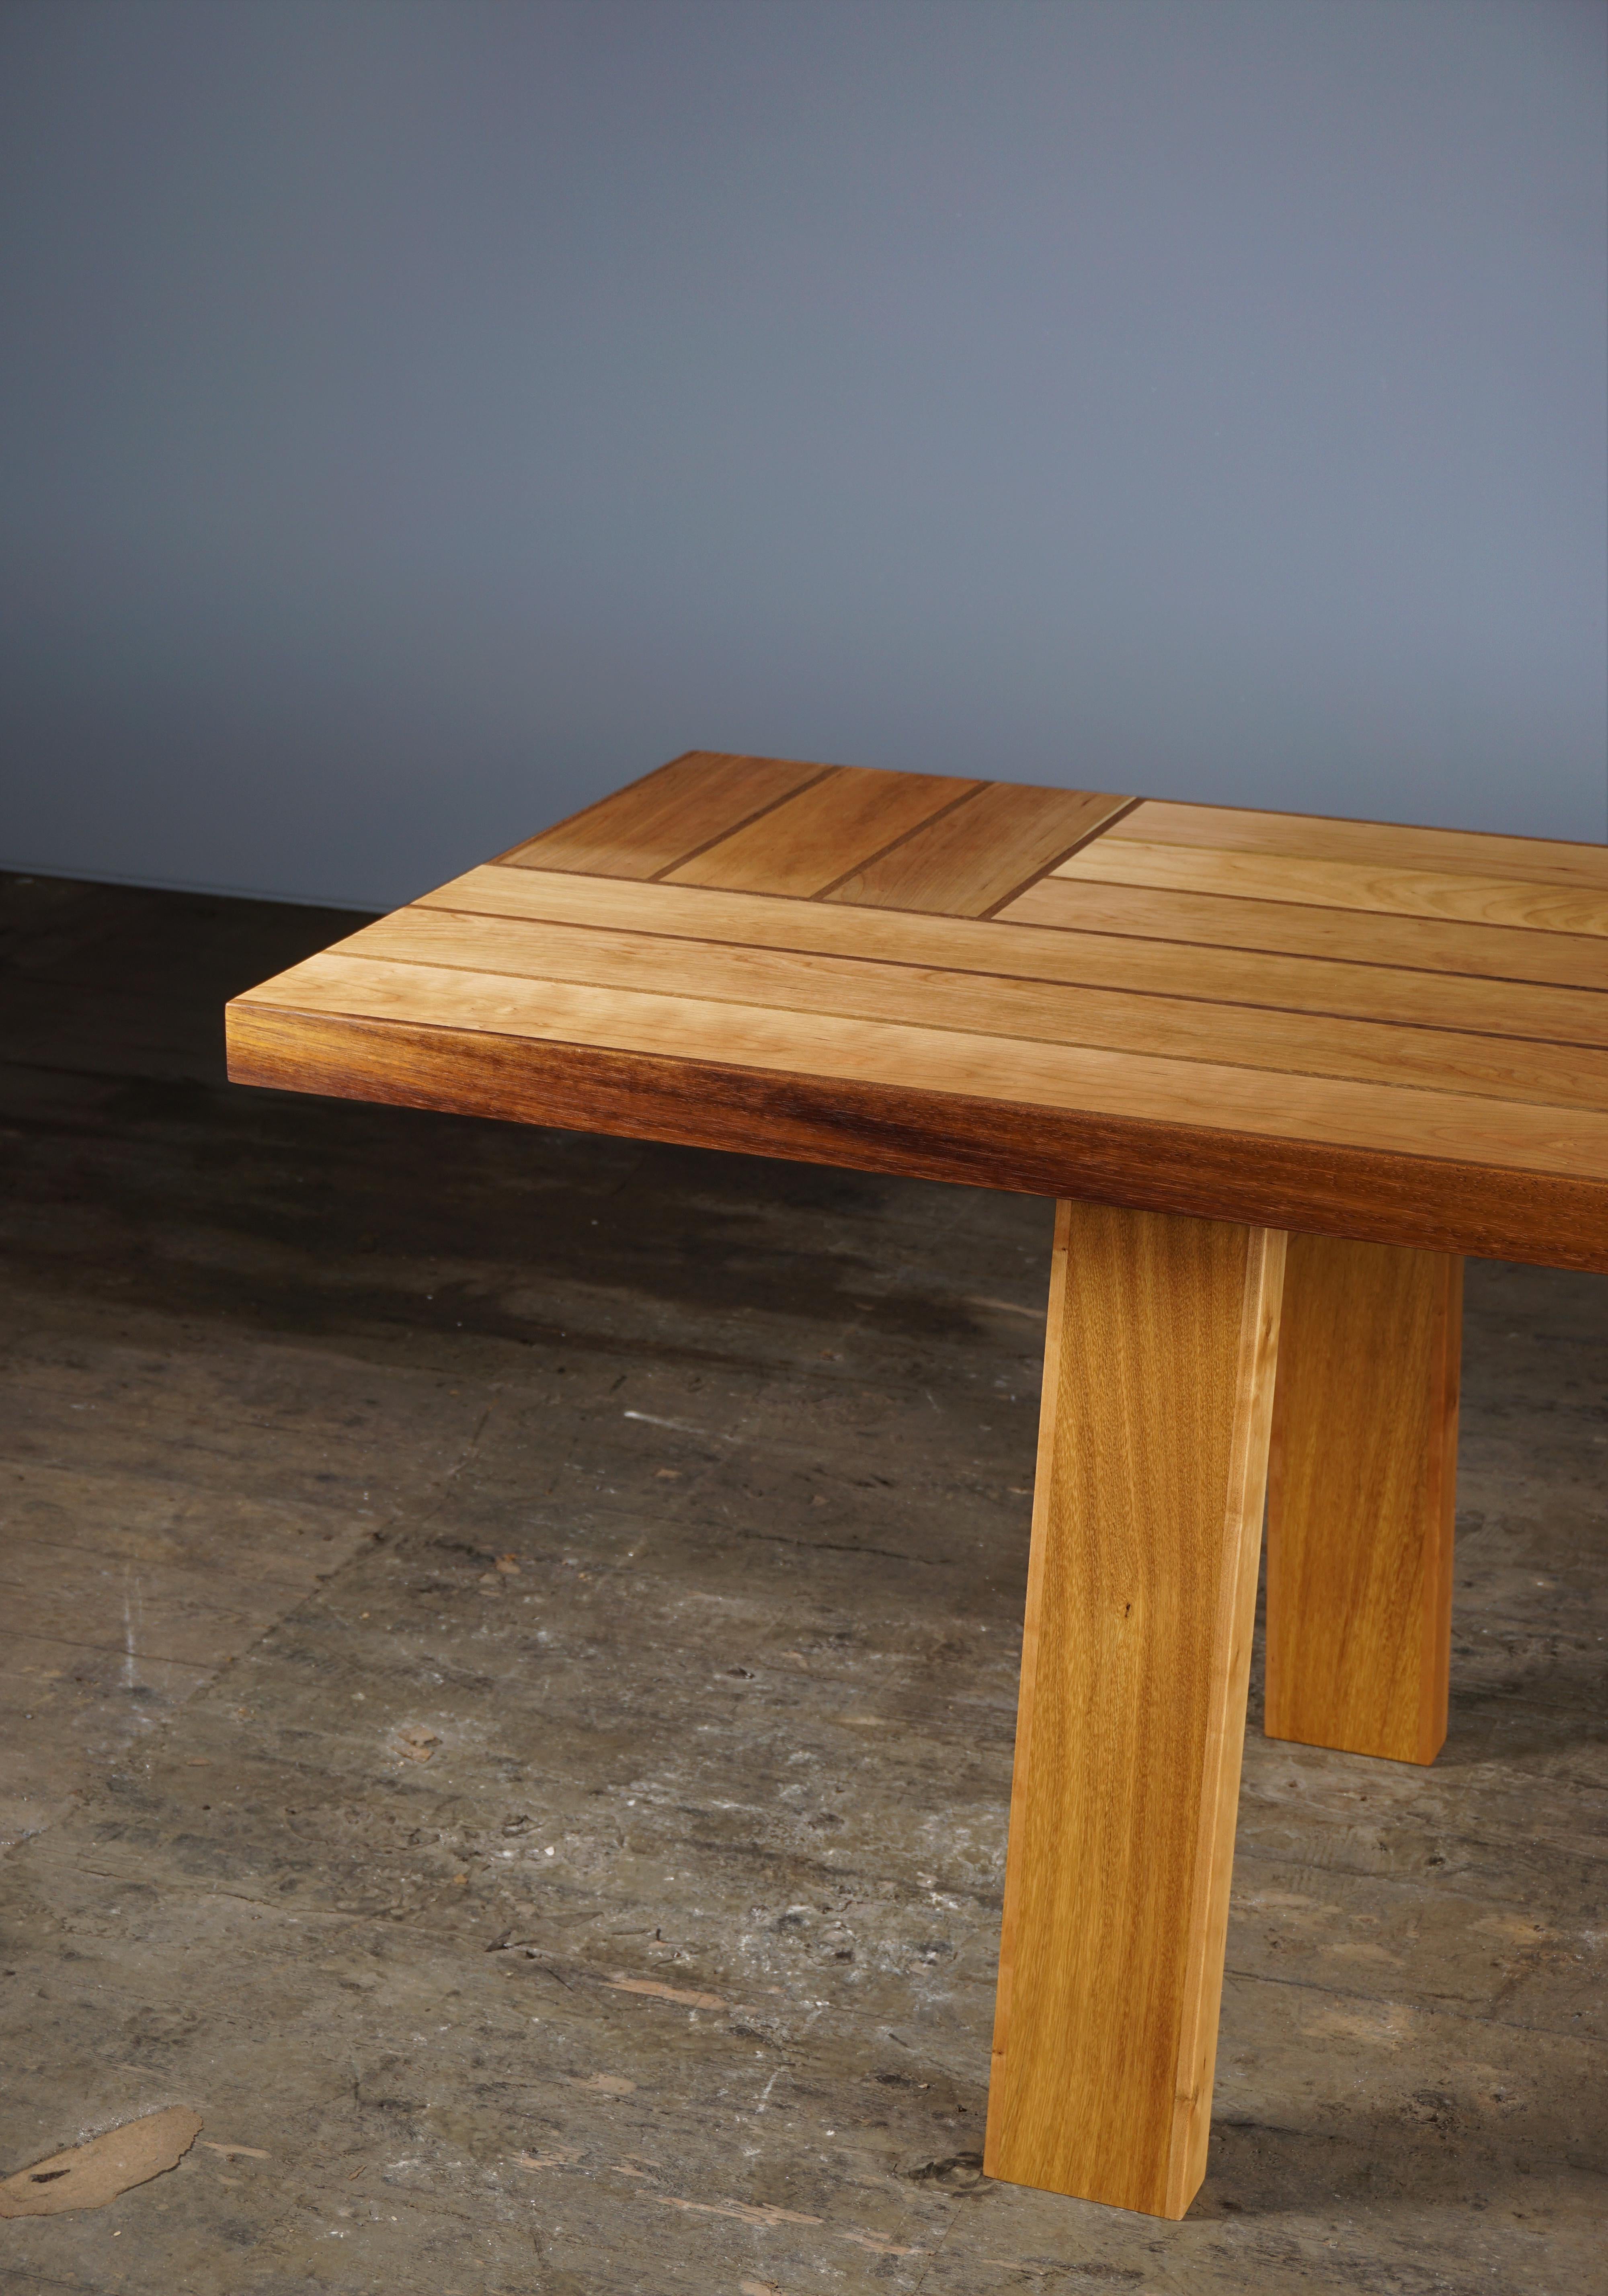 This 11ft dining table is made of American Cherry and Iroko. 
The structure is inspired by the structural rigidity of an I-beam. The tabletop consists of a sequence of vertical and horizontal boards which results in an entirely hollow structure.